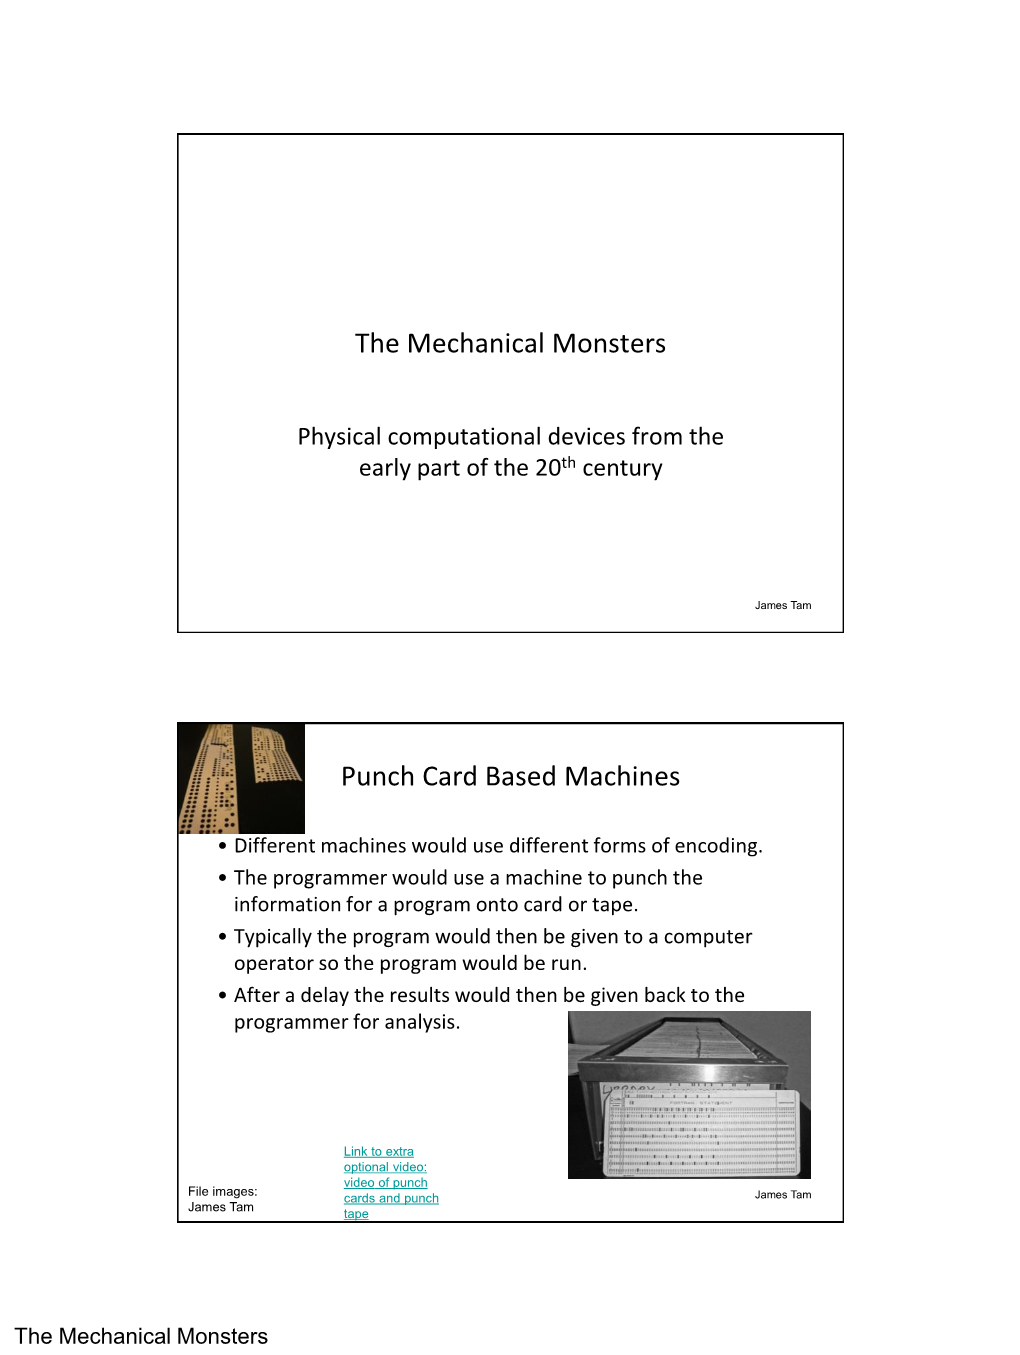 The Mechanical Monsters Punch Card Based Machines